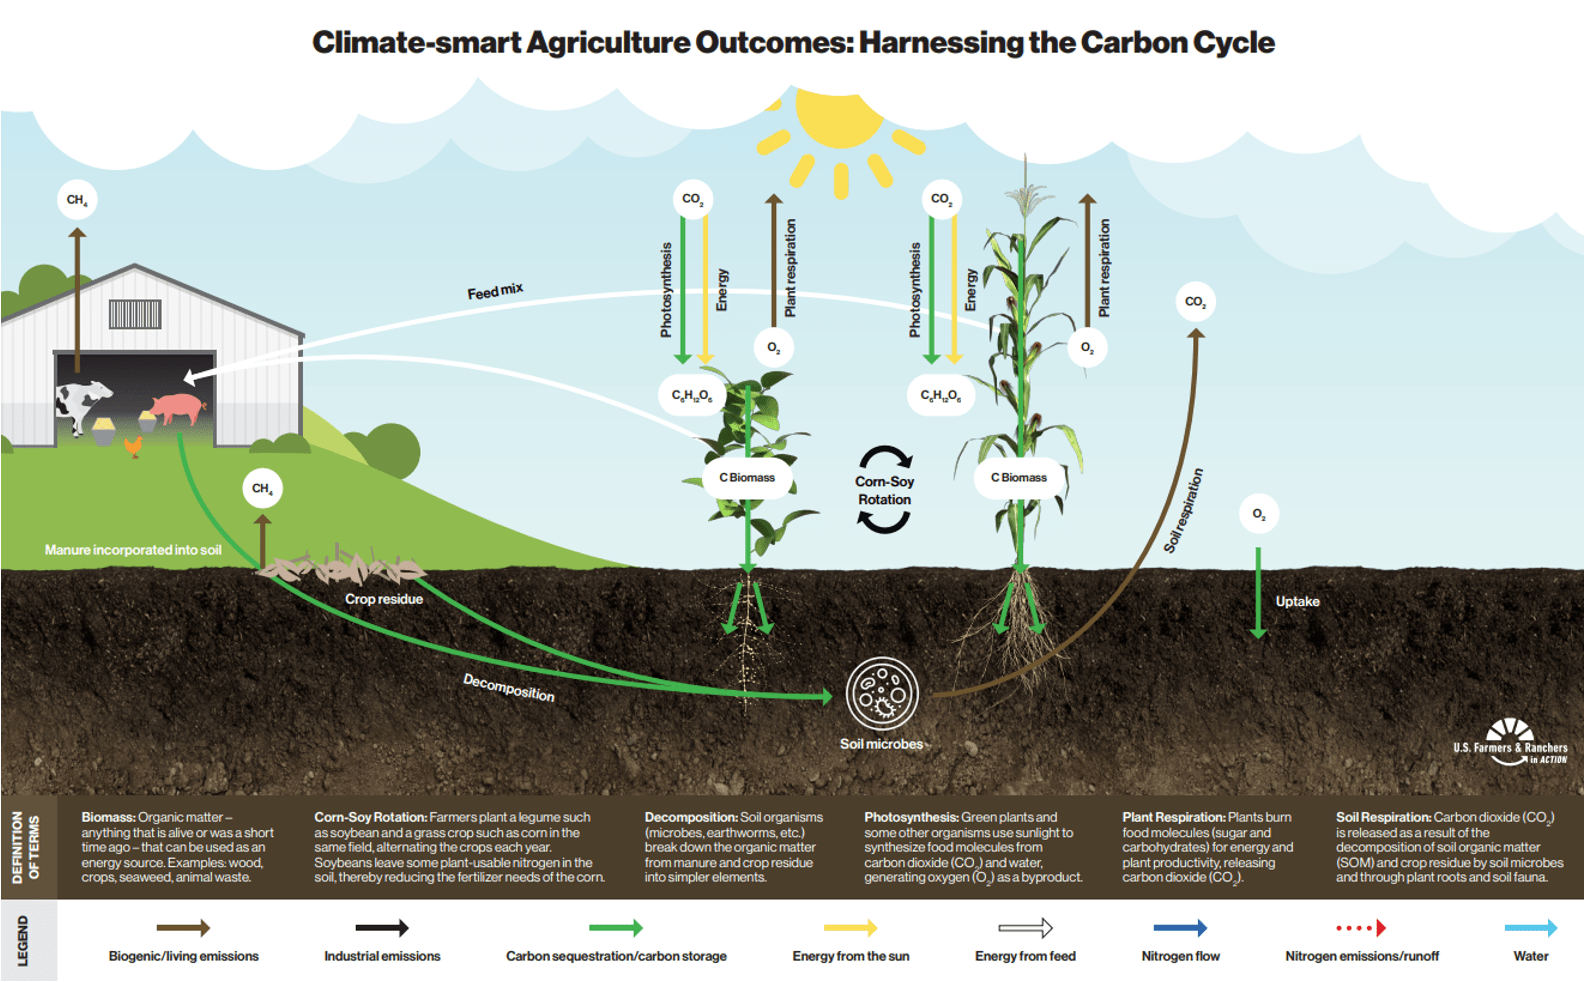 Graphic depicting the pathways of carbon exchange between livestock, crop residue, soil, crops, and atmosphere.